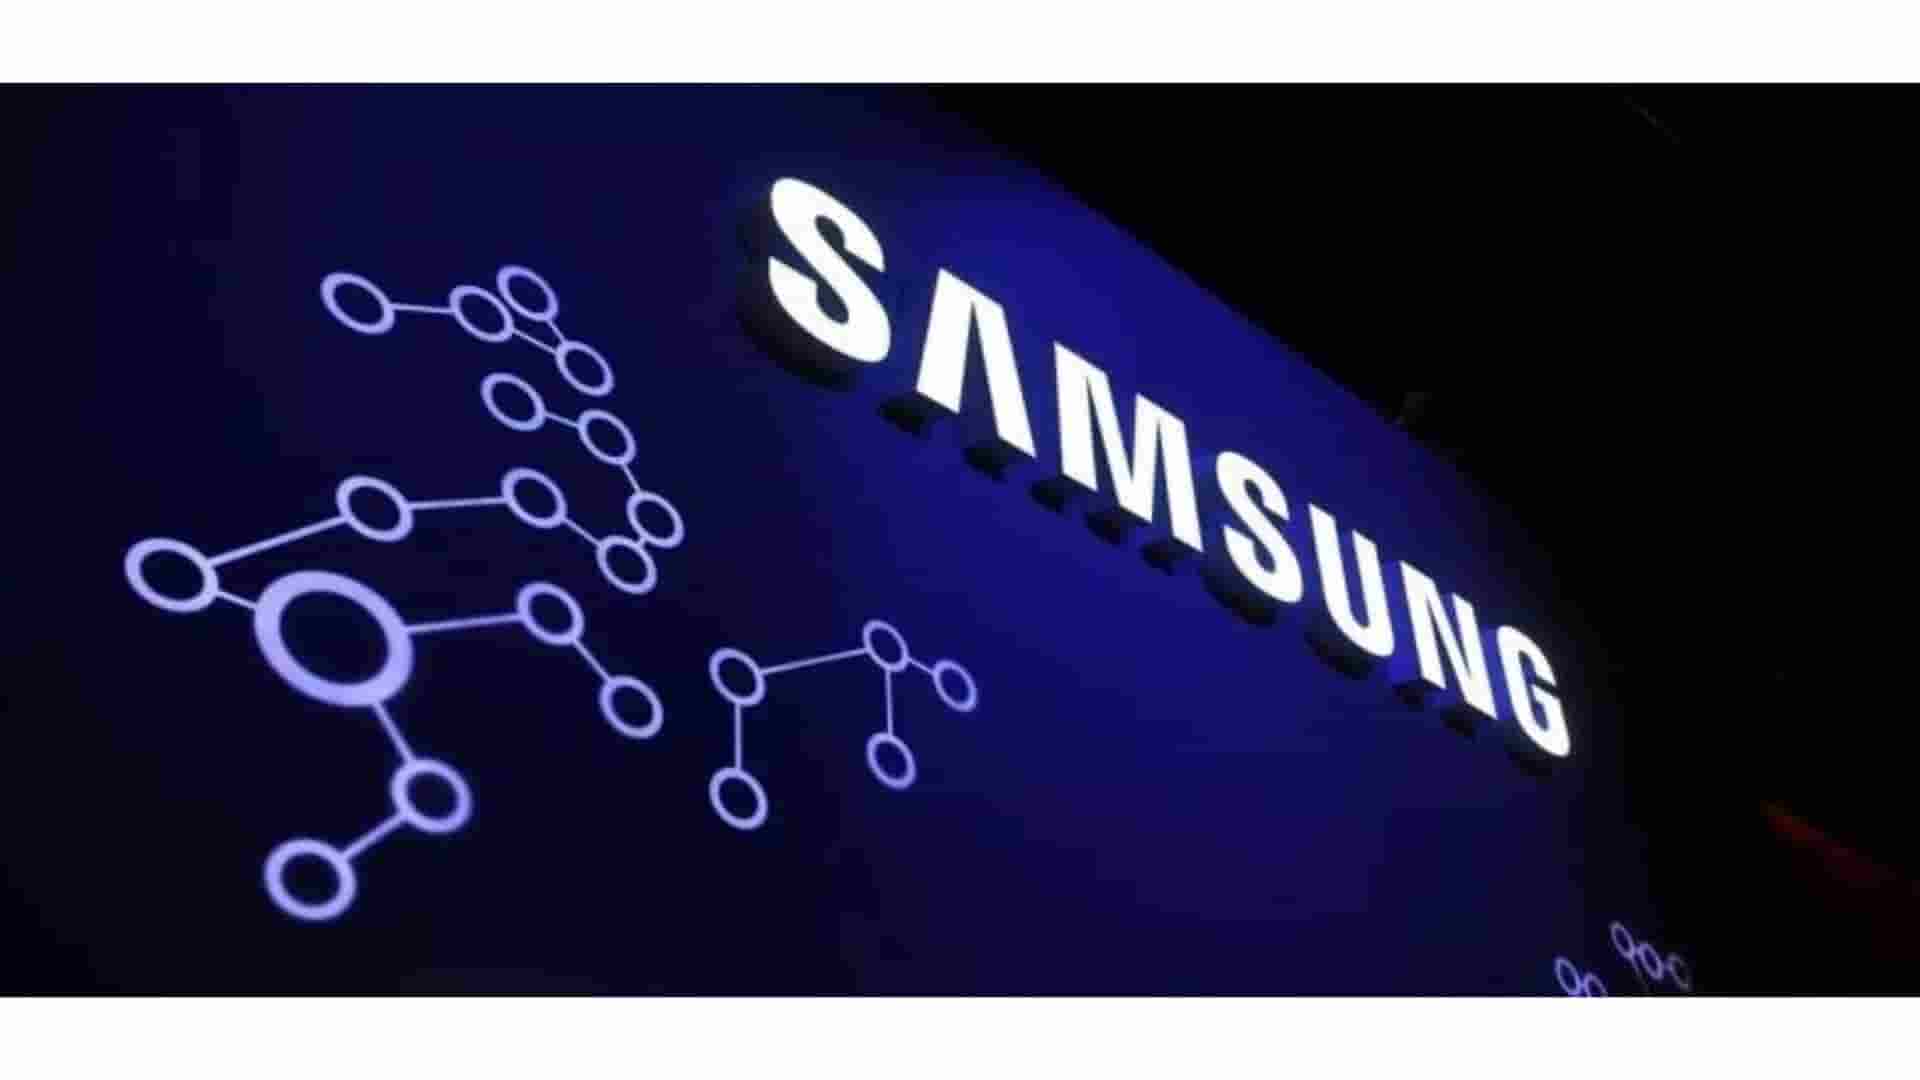 How Is Samsung Building Future With Technology [Samsung Electronics Case Study]